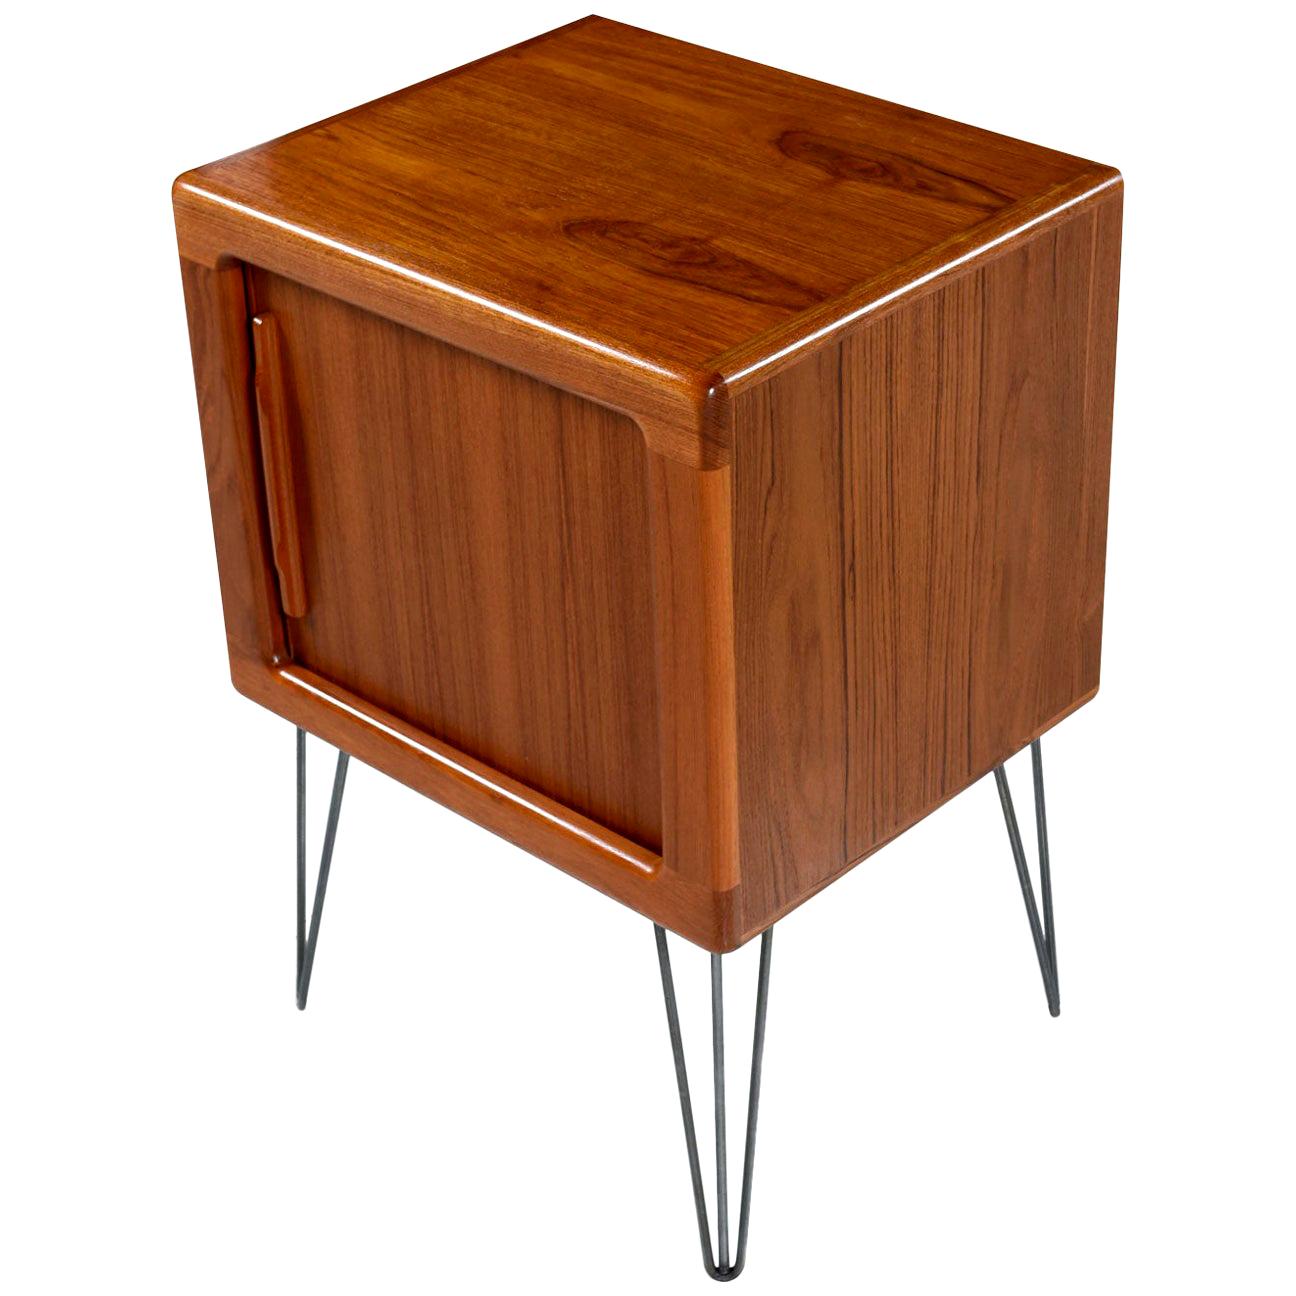 Vintage midcentury Scandinavian Modern Danish teak tambour door cabinet / nightstand. Ideal as a media cabinet / TV Stand and deep enough to accommodate 12 inch LP’s. Expertly crafted with sleek lip-like, solid teak carved handles gracing the